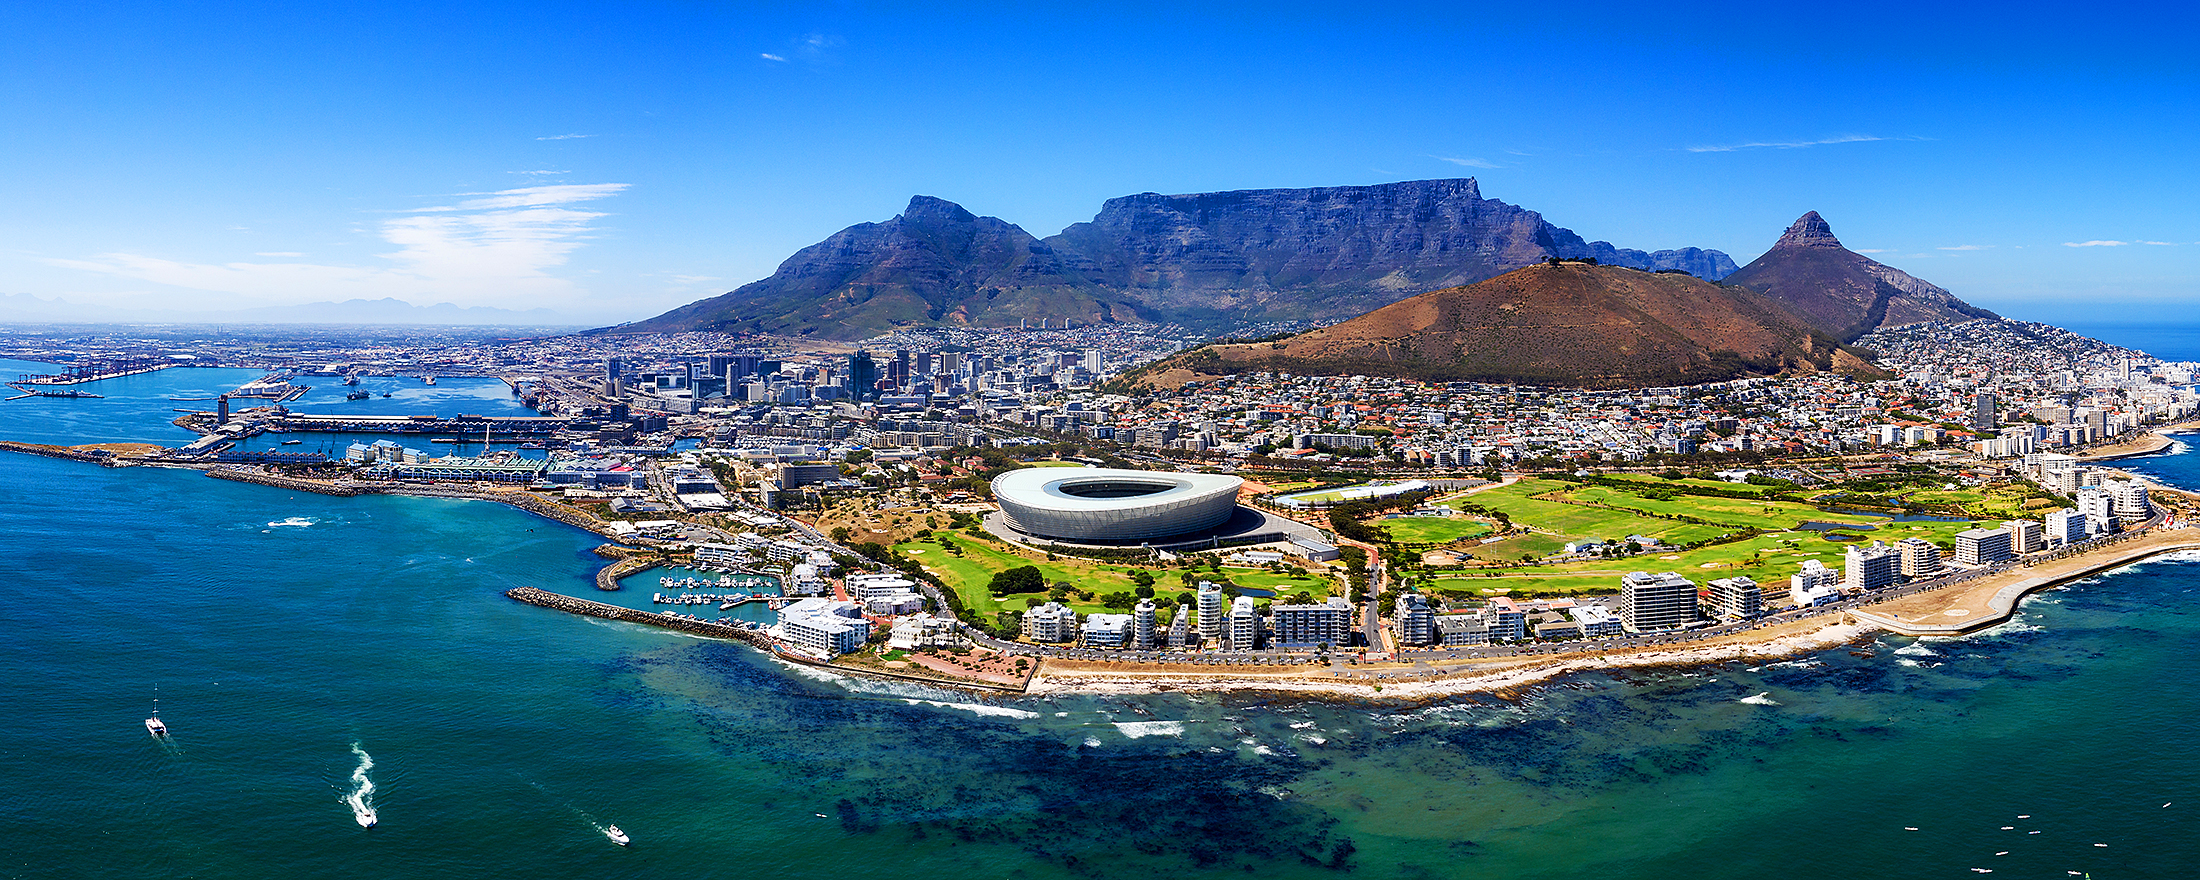 South Africa School Holiday Deals